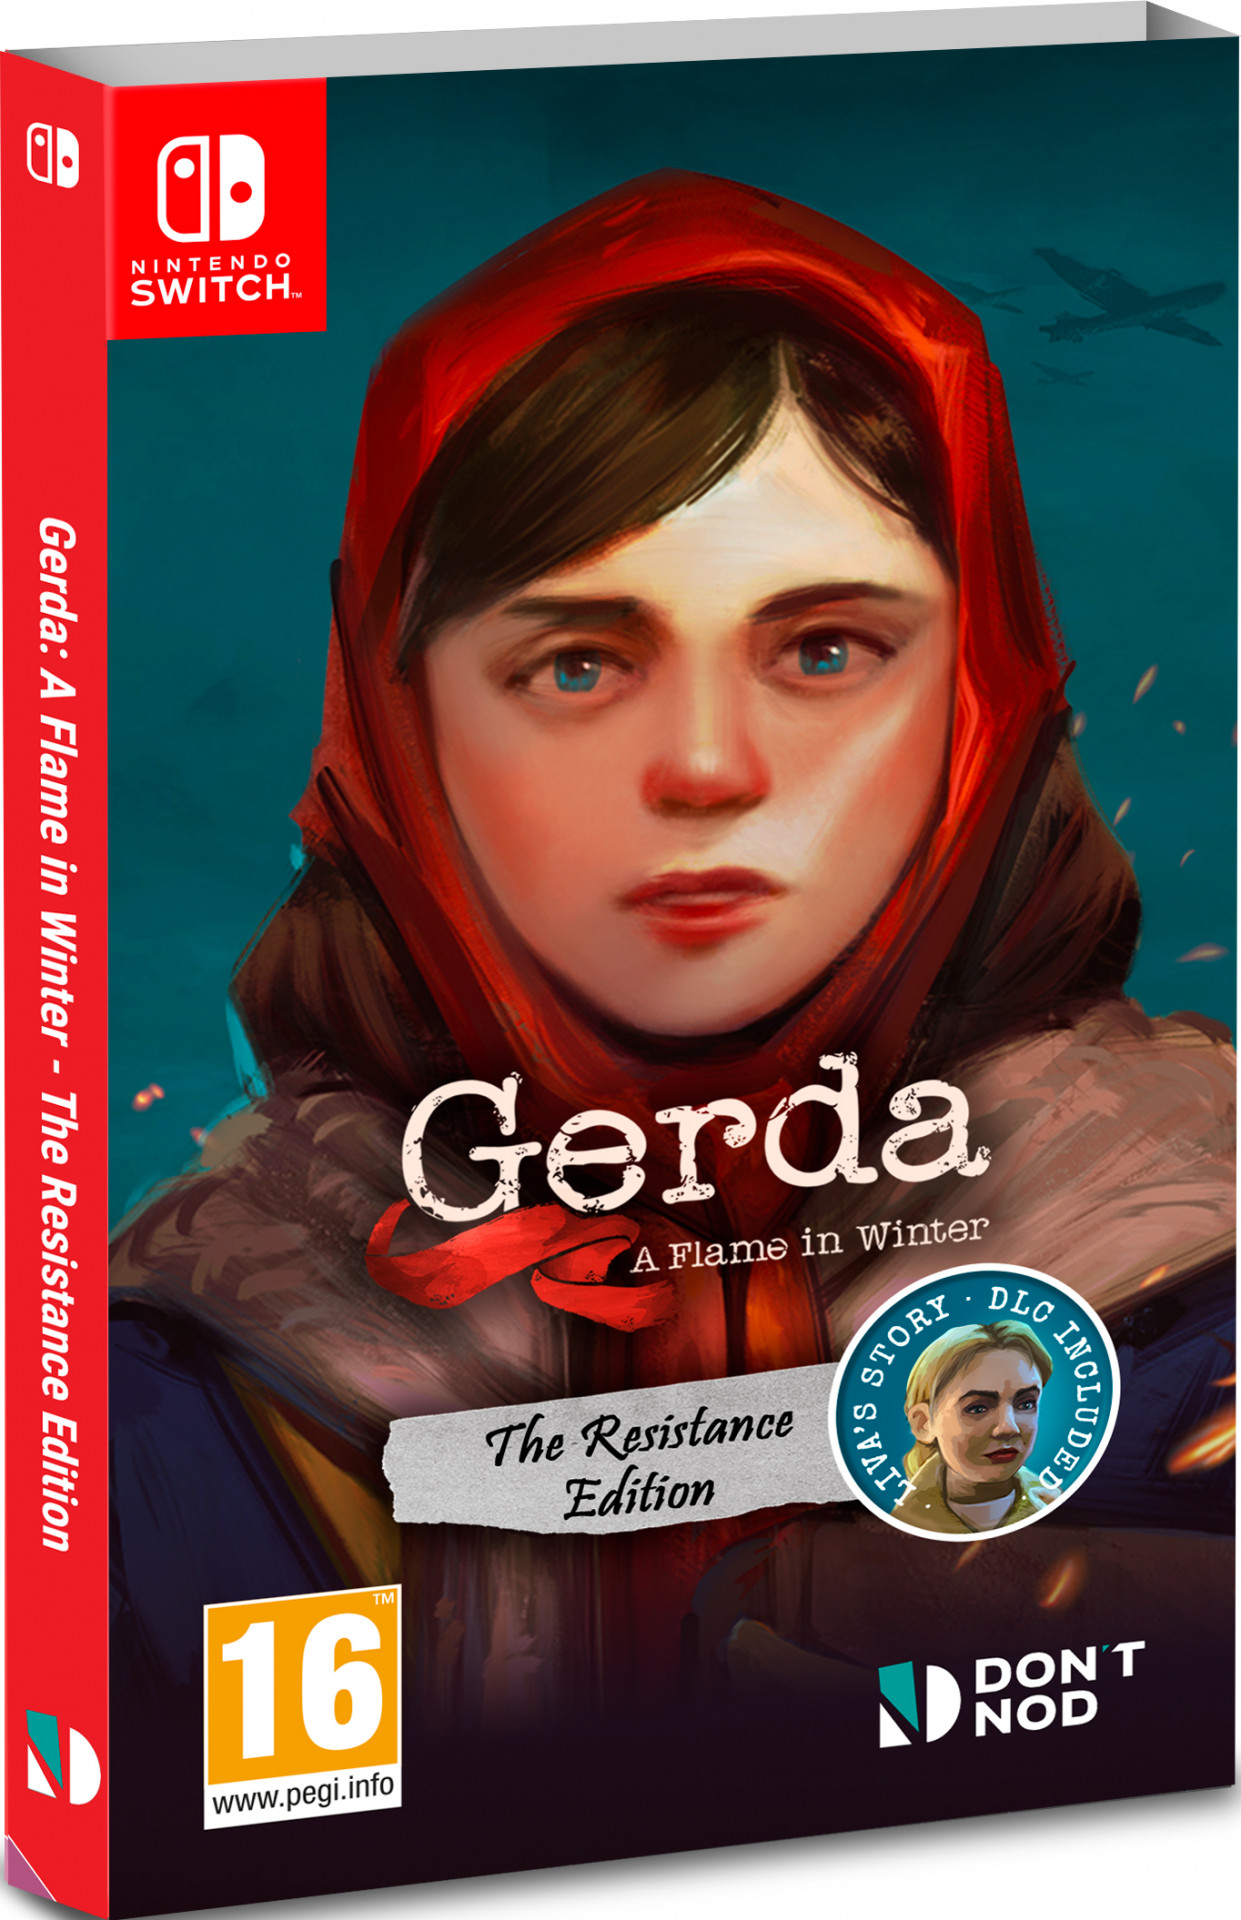 Gerda A Flame In Winter The Resistance Edition